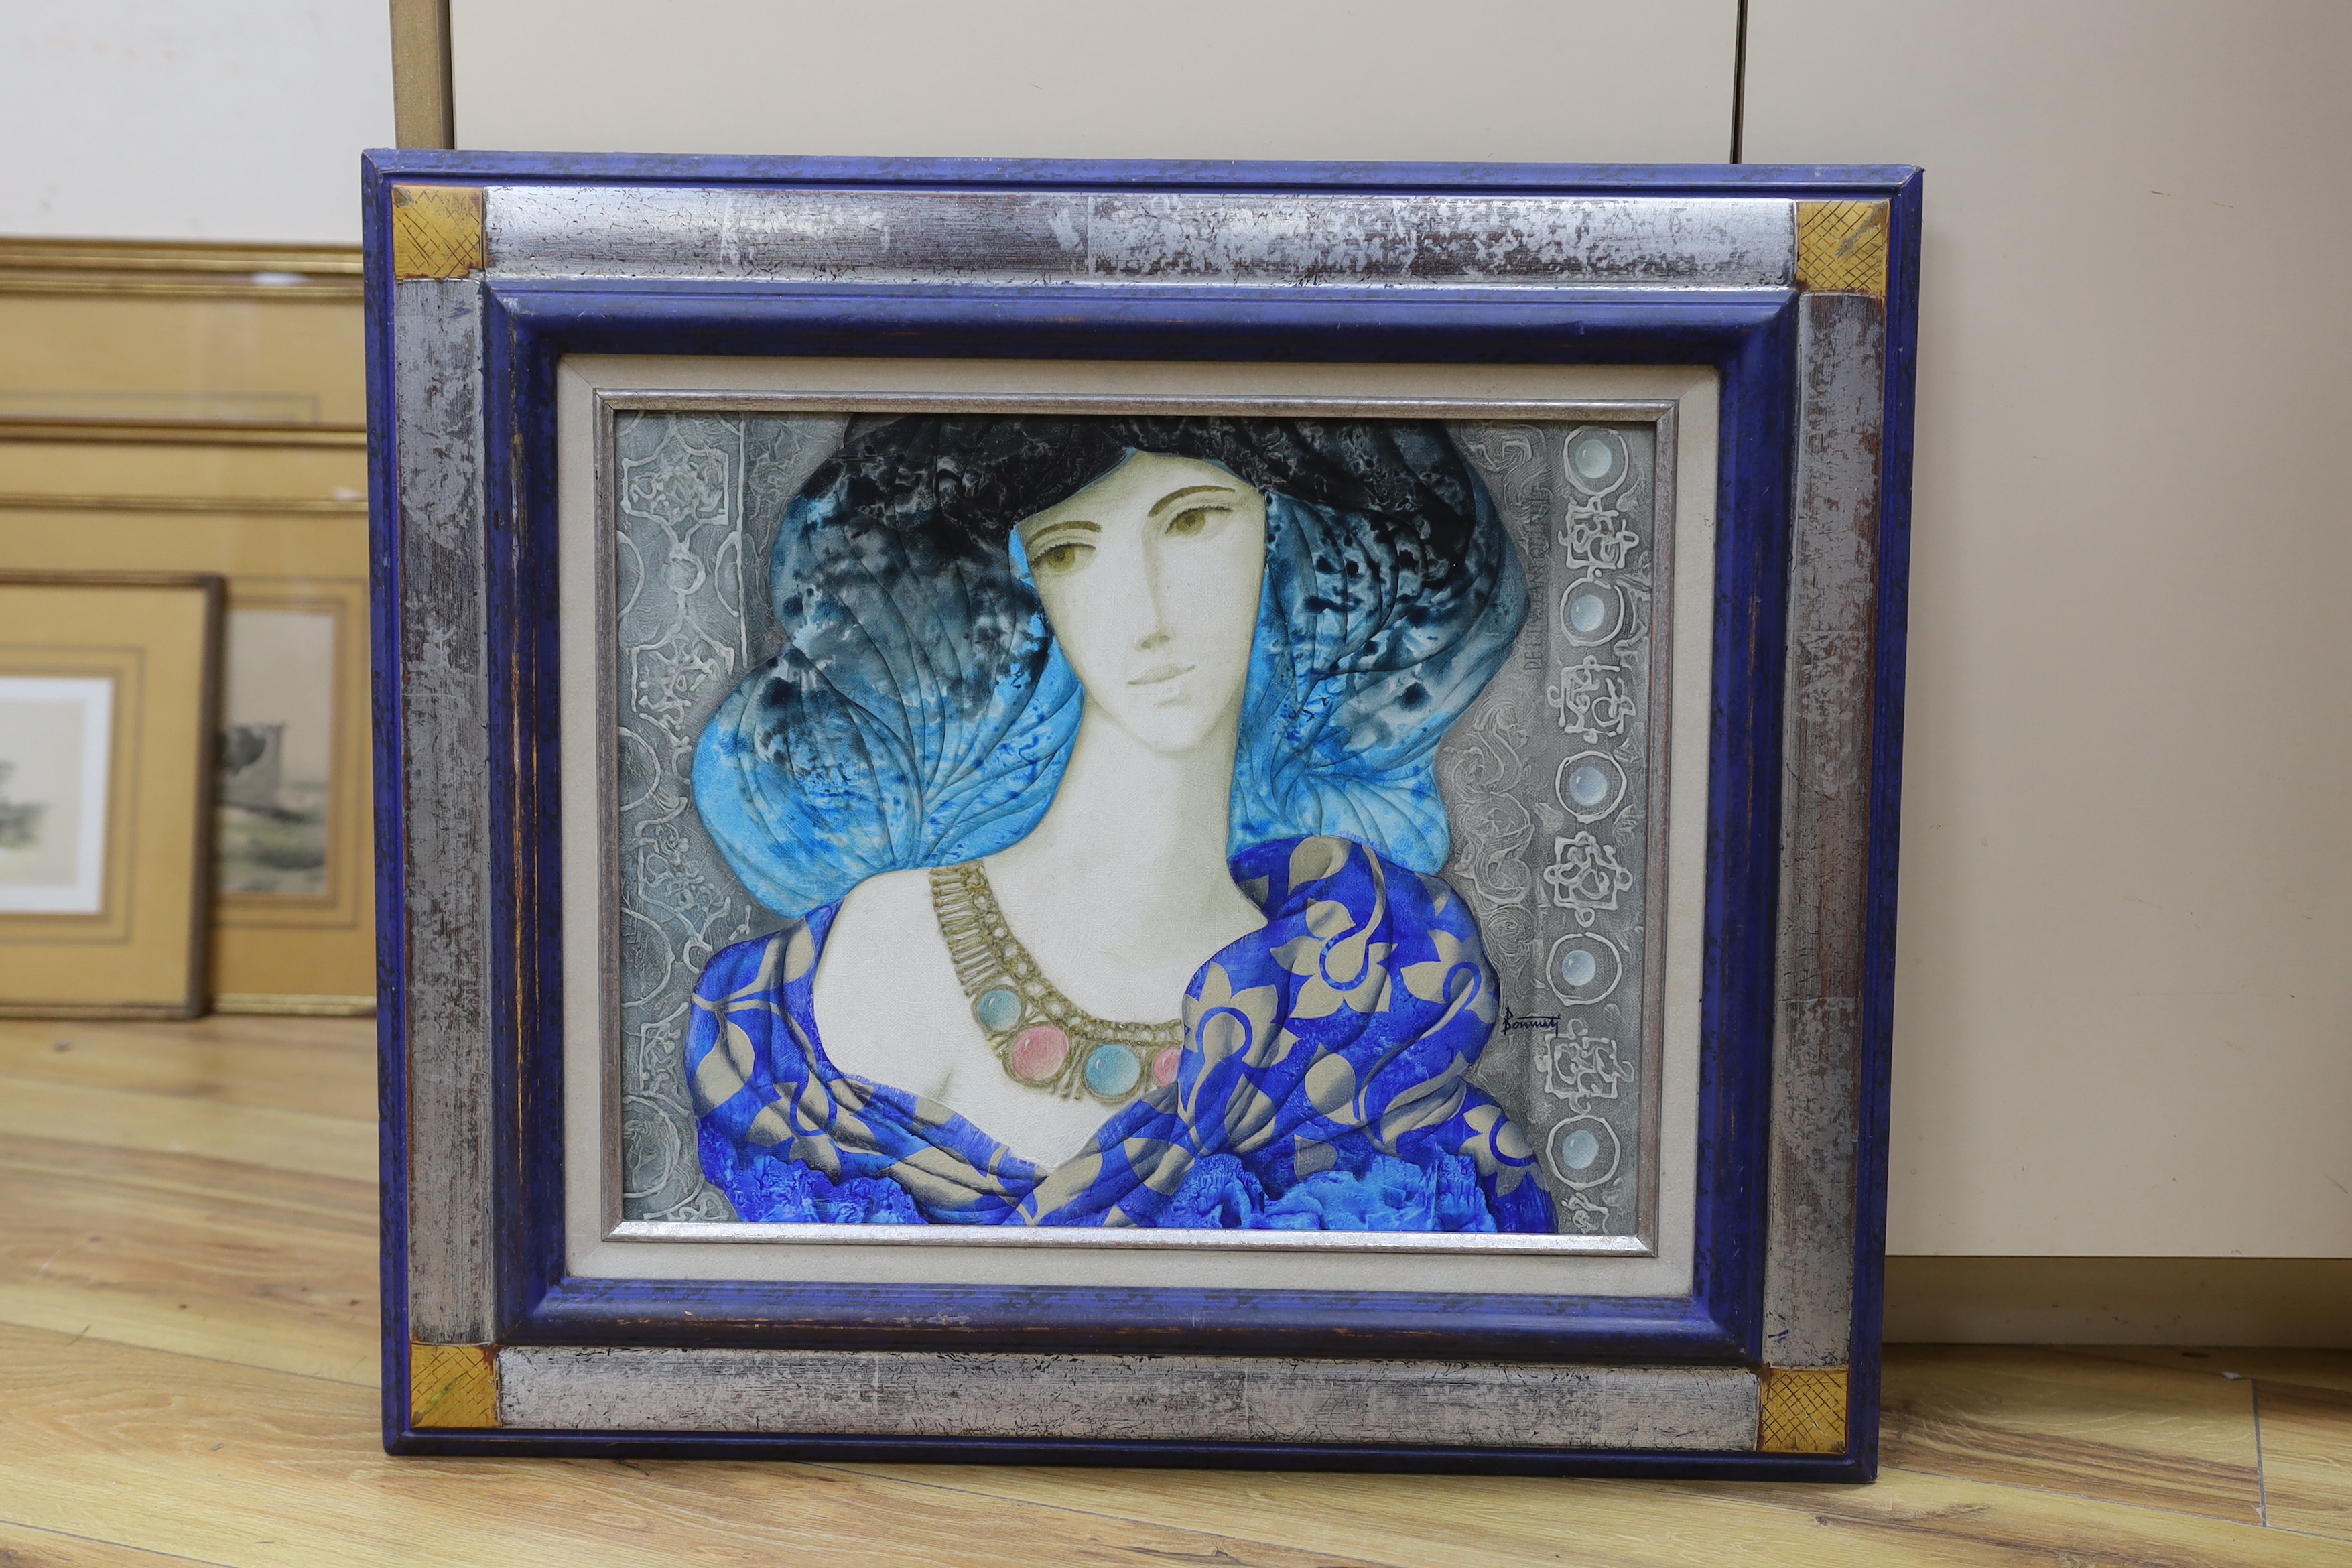 Gabriel Bonmati (Moroccan, 1928-2005), oil on canvas, 'Blue woman', signed, various inscriptions - Image 2 of 4